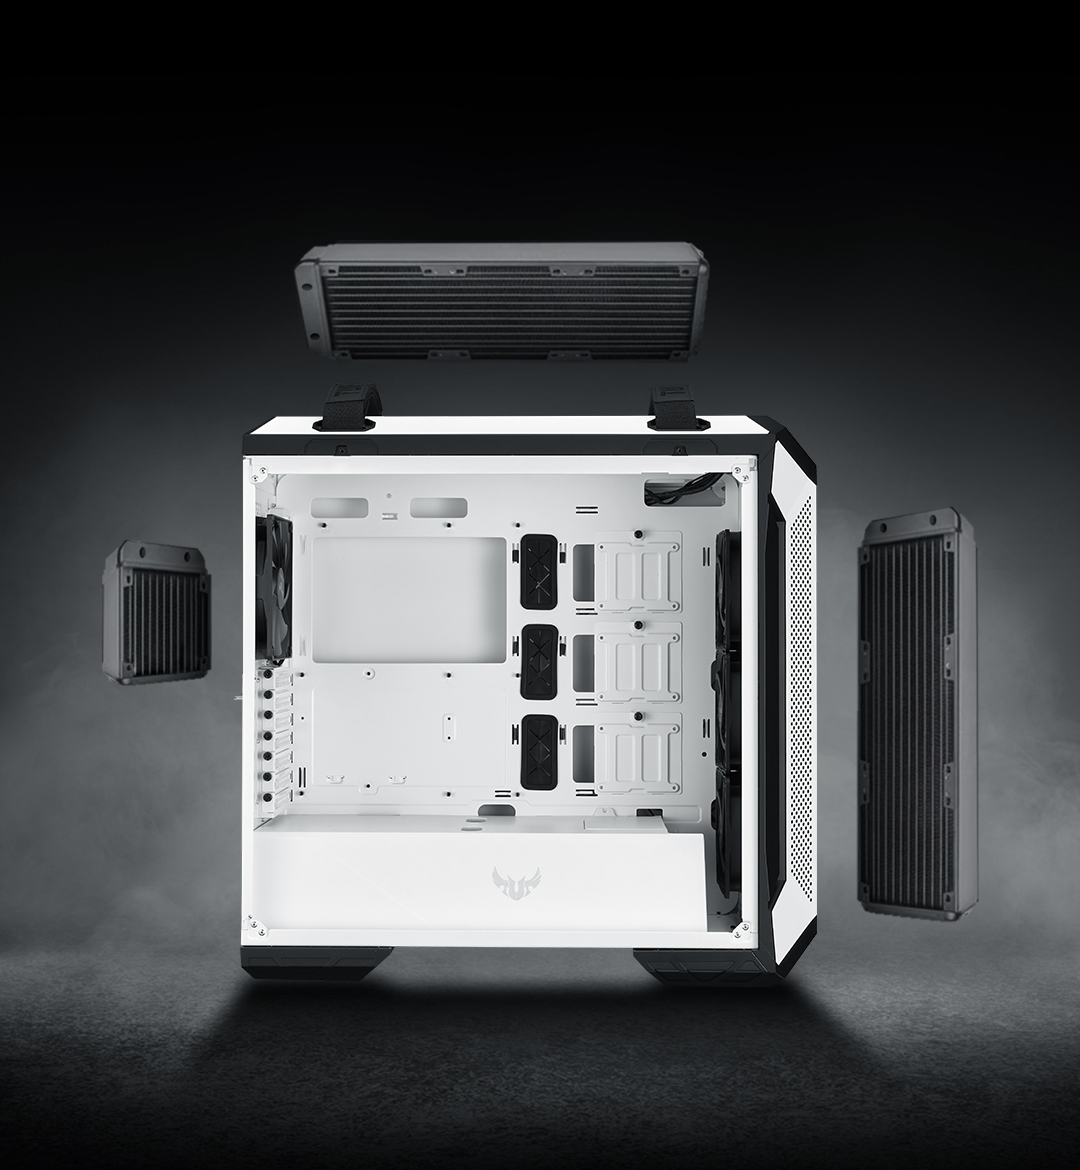 TUF Gaming GT501 white edition iscompatible with wide-raning radiators.